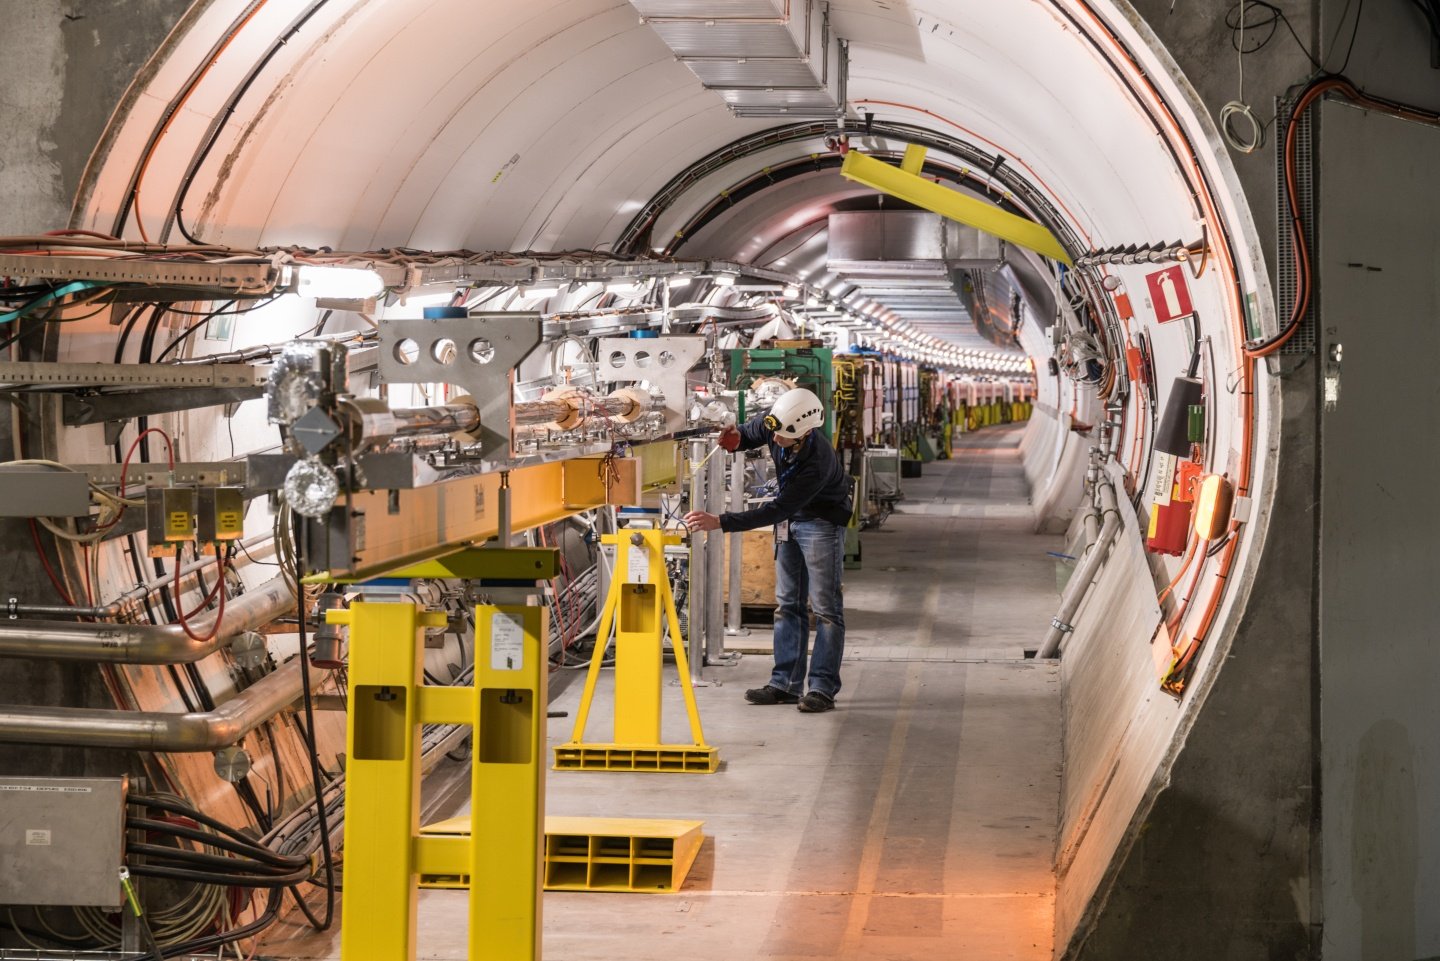 Here is everything you need to know about CERN